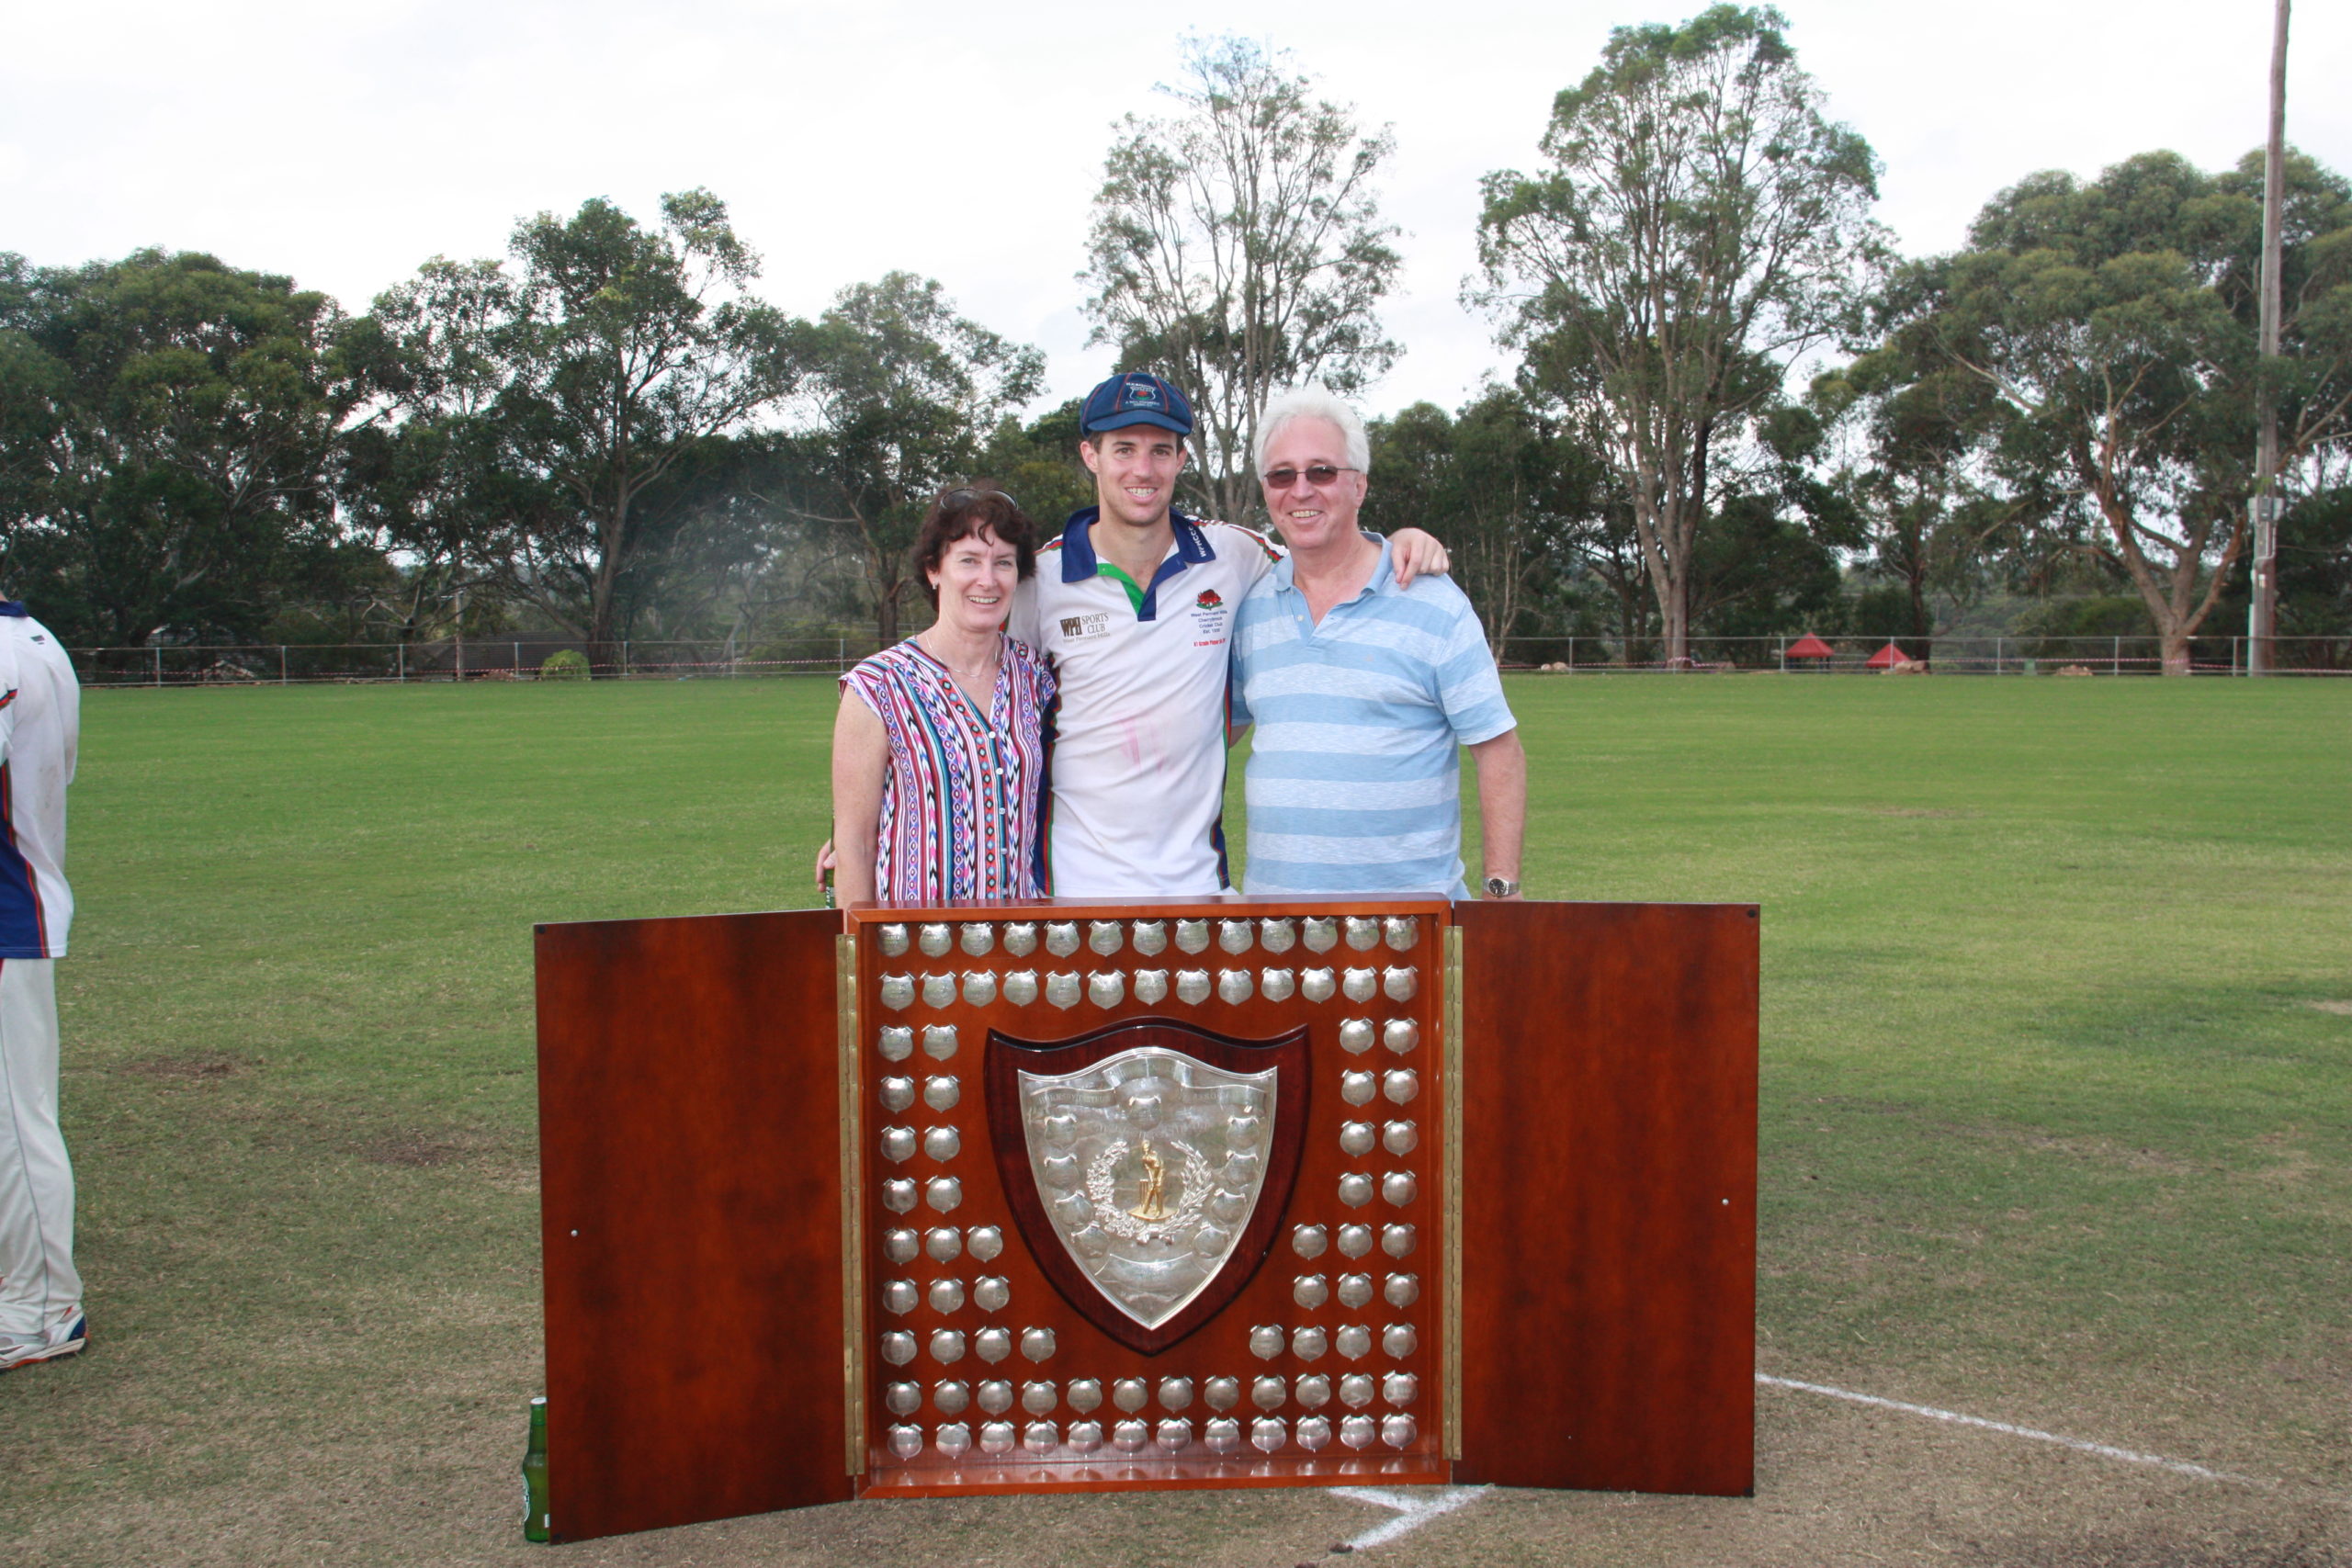 Scott Henderson with his mum and dad. A1 Grand Final (Rofie 3) (81) Vs ARL (67).